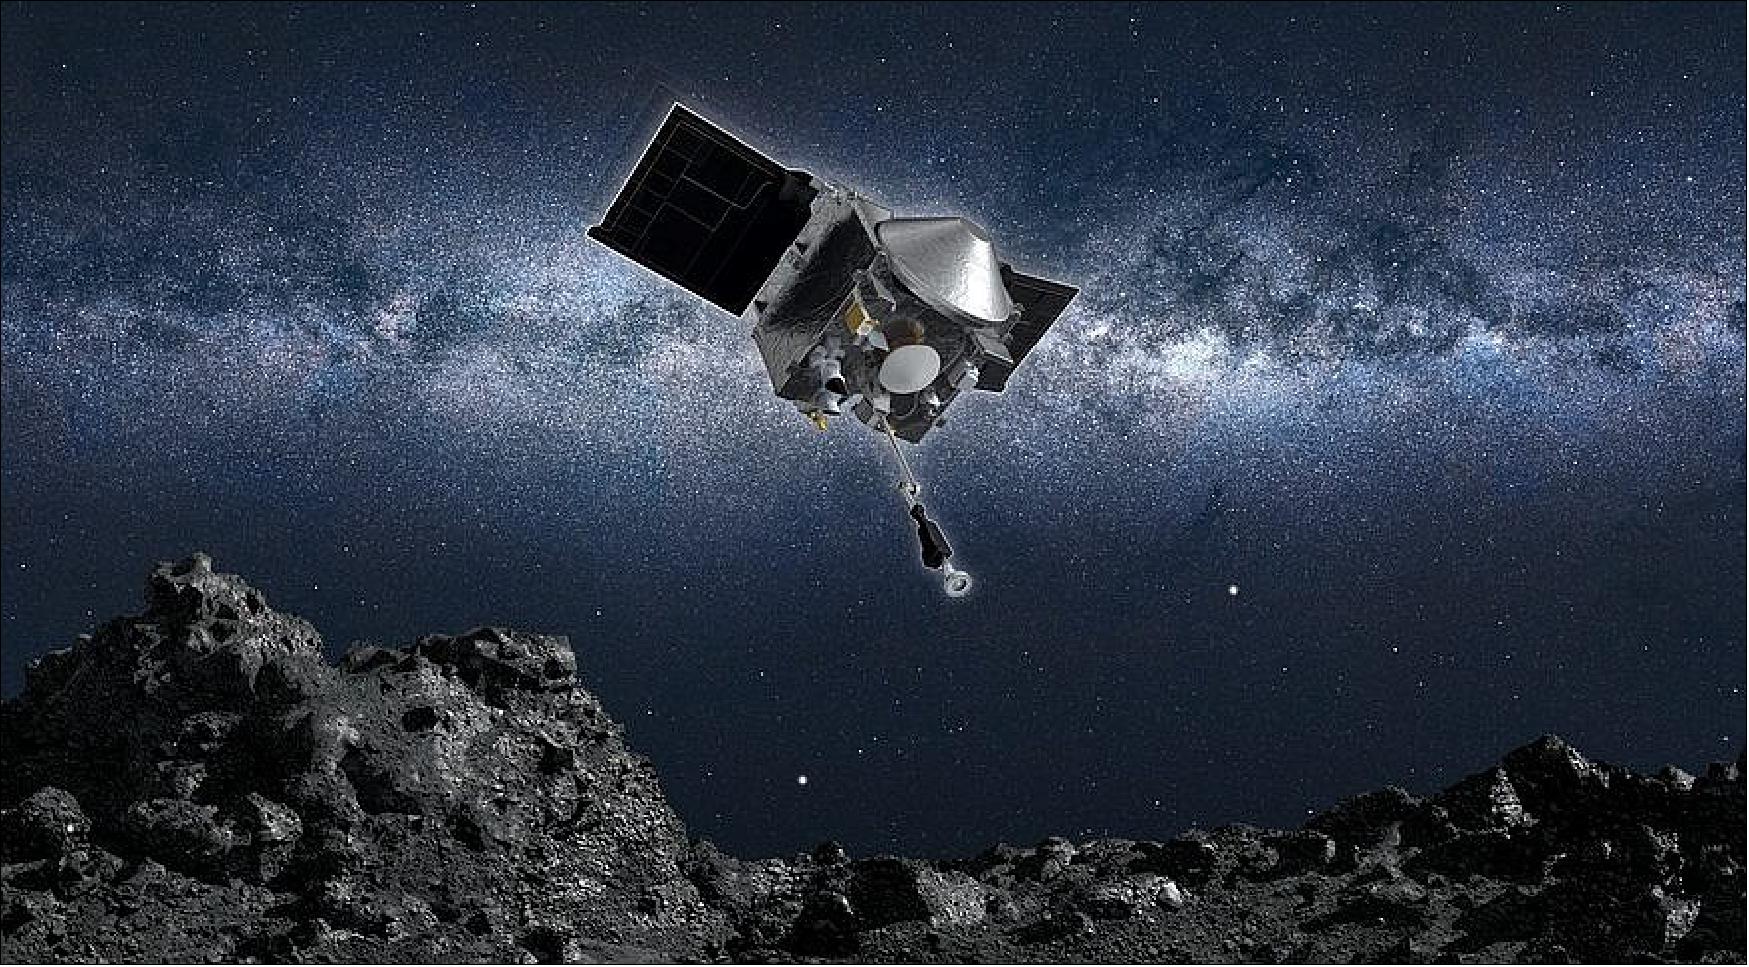 Figure 1: NASA's OSIRIS-REx mission, after returning samples collected from the asteroid Bennu, will get a second life as OSIRIS-APEX to visit the asteroid Apophis in 2029 (image credit: NASA/GSFC/Univ. of Arizona)